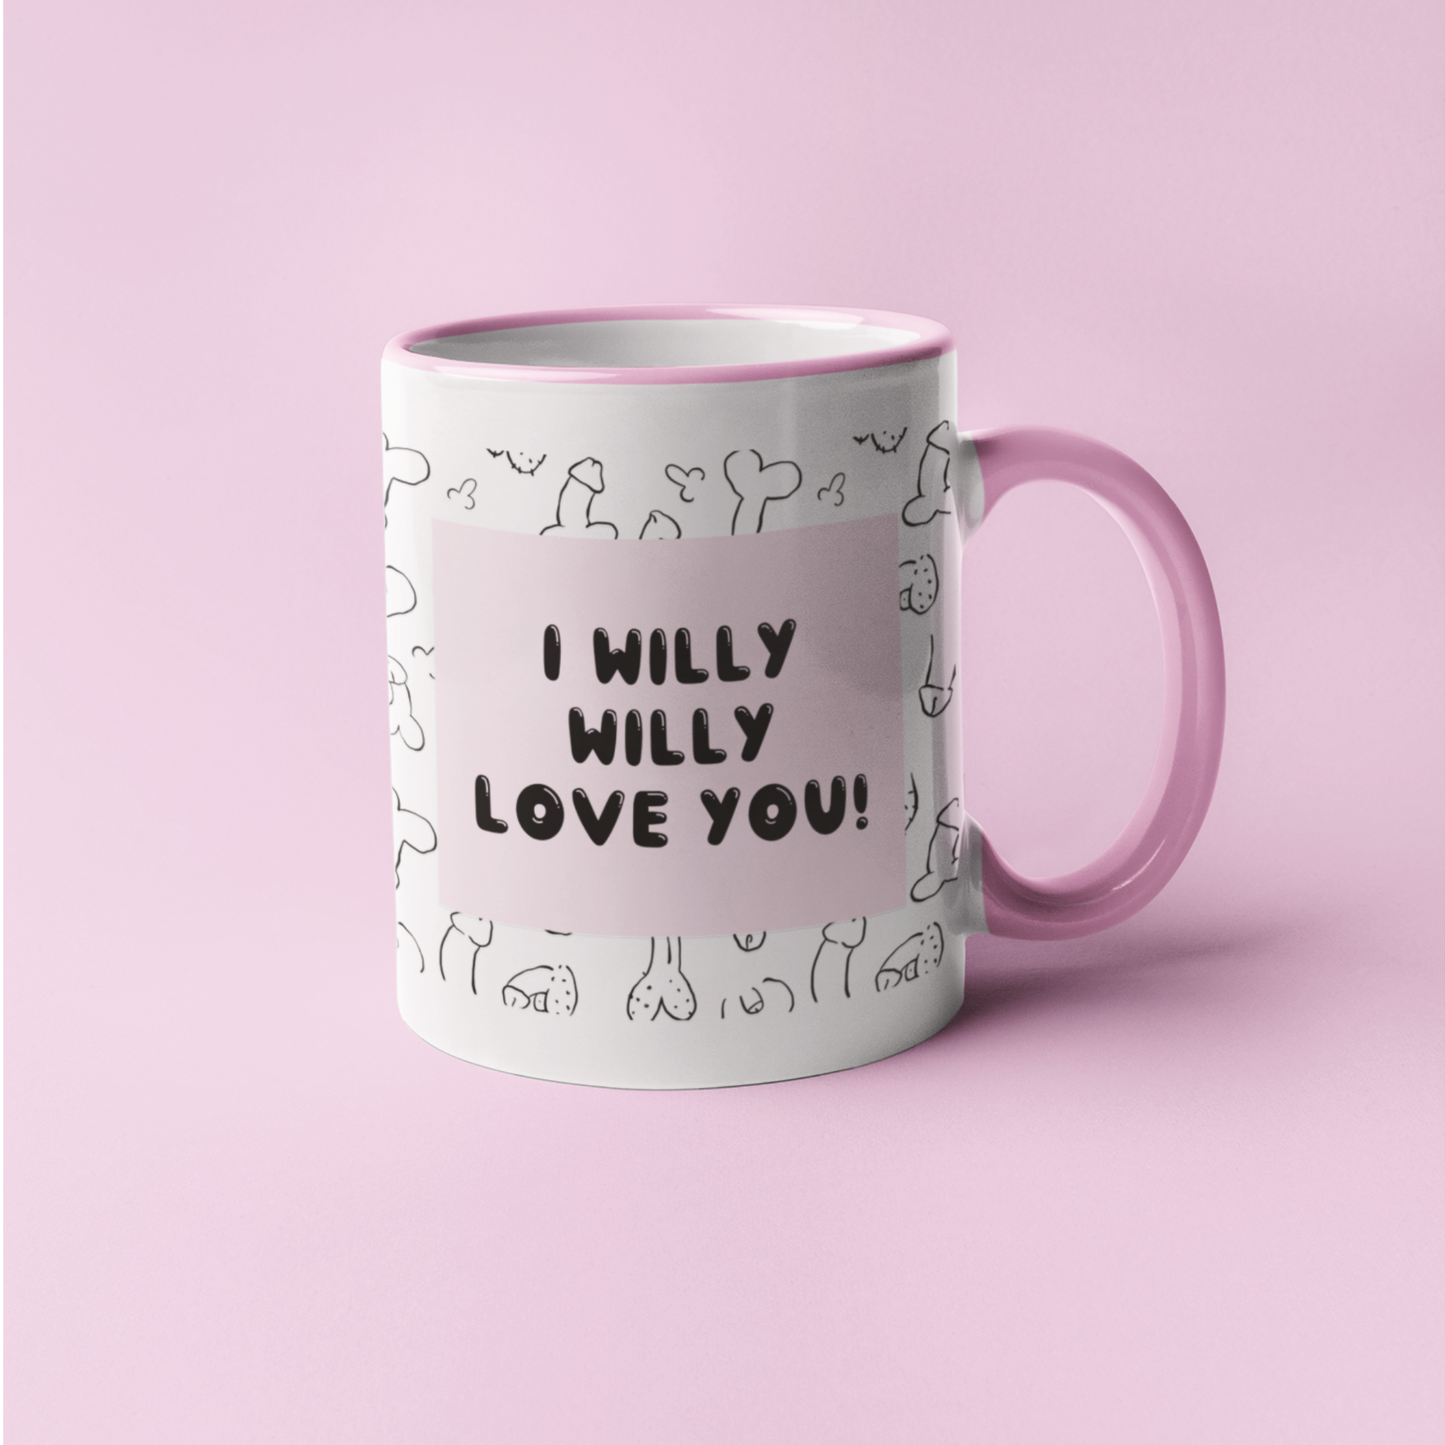 Mug - I Willy Willy Love You